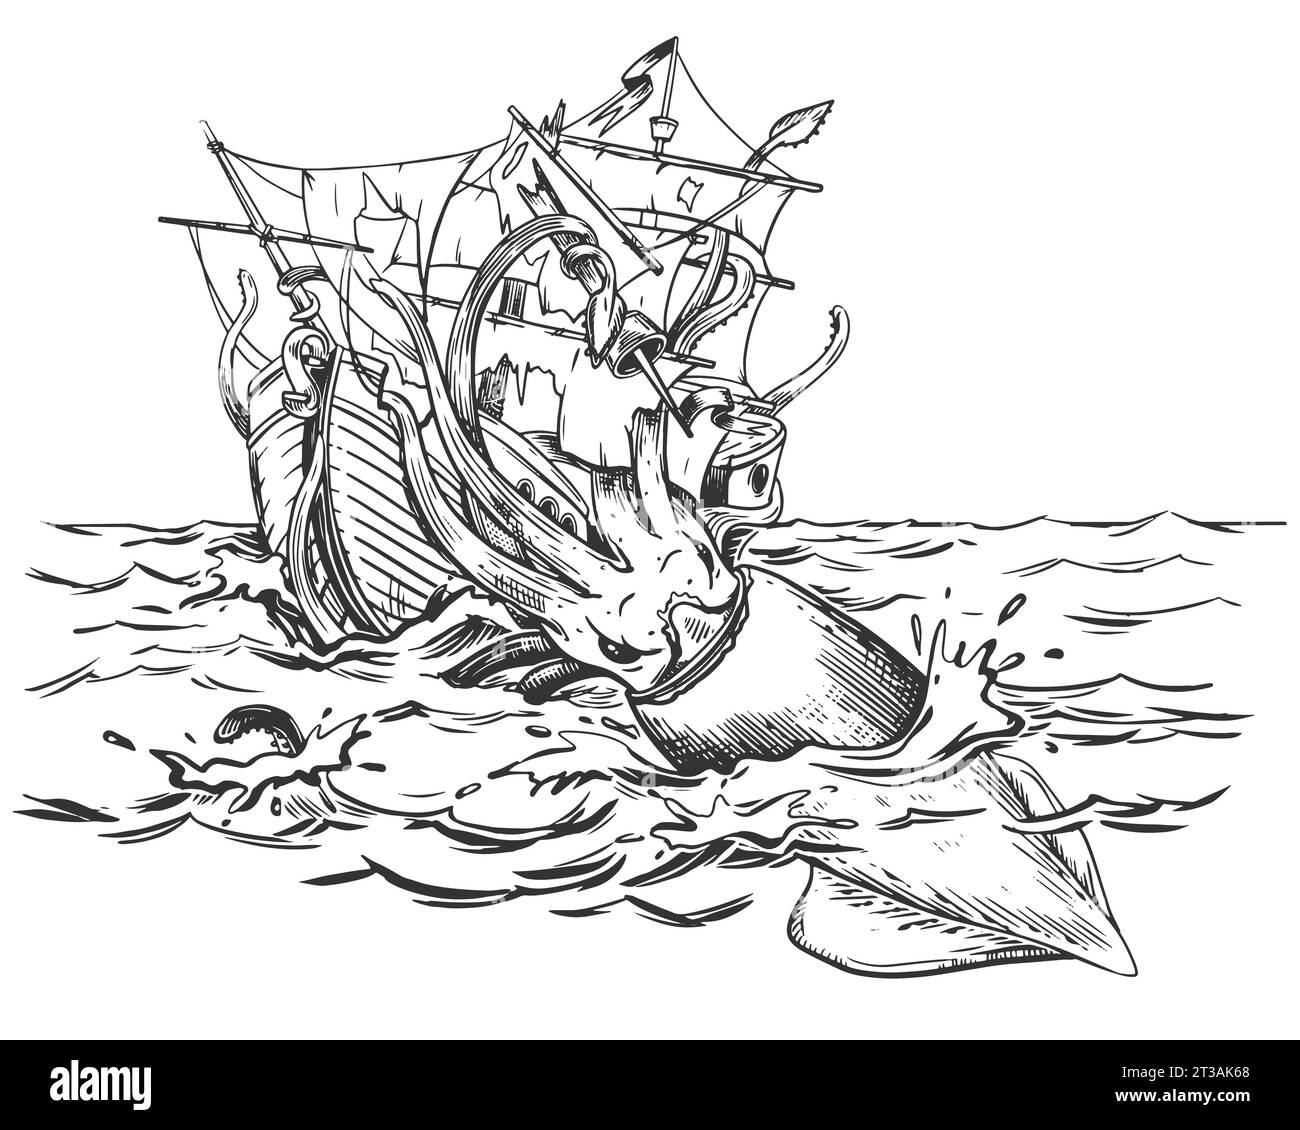 The legendary kraken is attacking the ship. A huge squid drags a sailboat underwater. Monochrome drawing. Vector illustration in engraving style. Comp Stock Vector